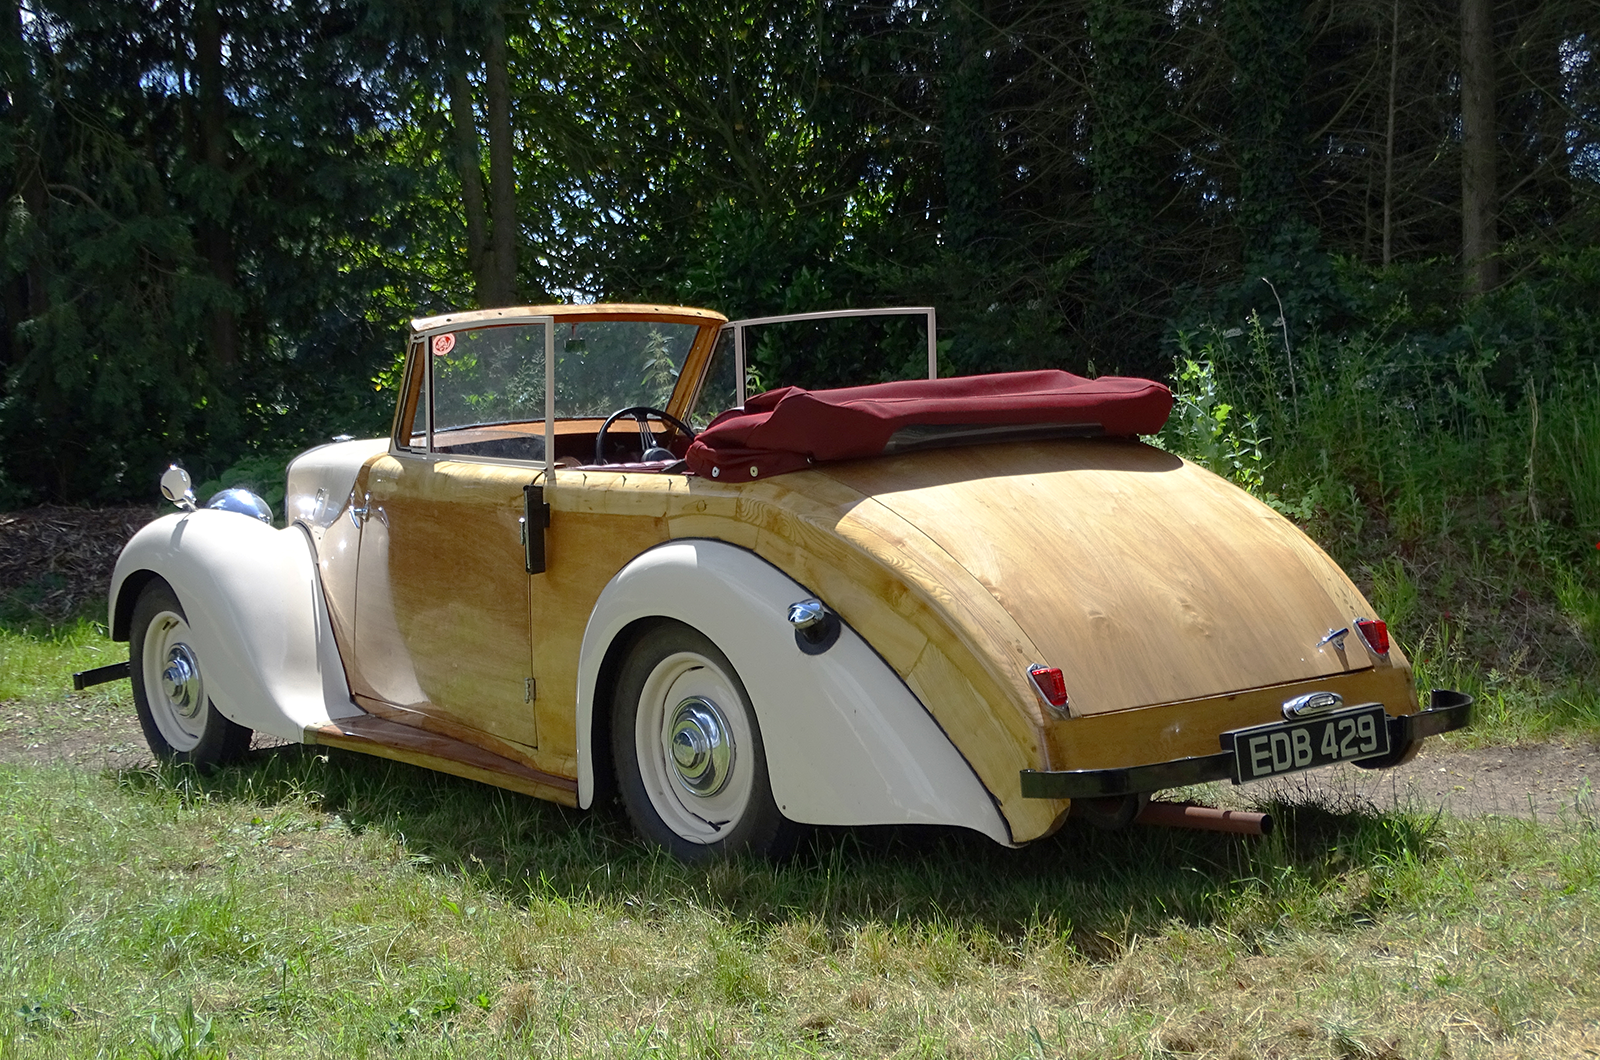 This 1947 Lea-Francis was The Beatles’ ticket to ride